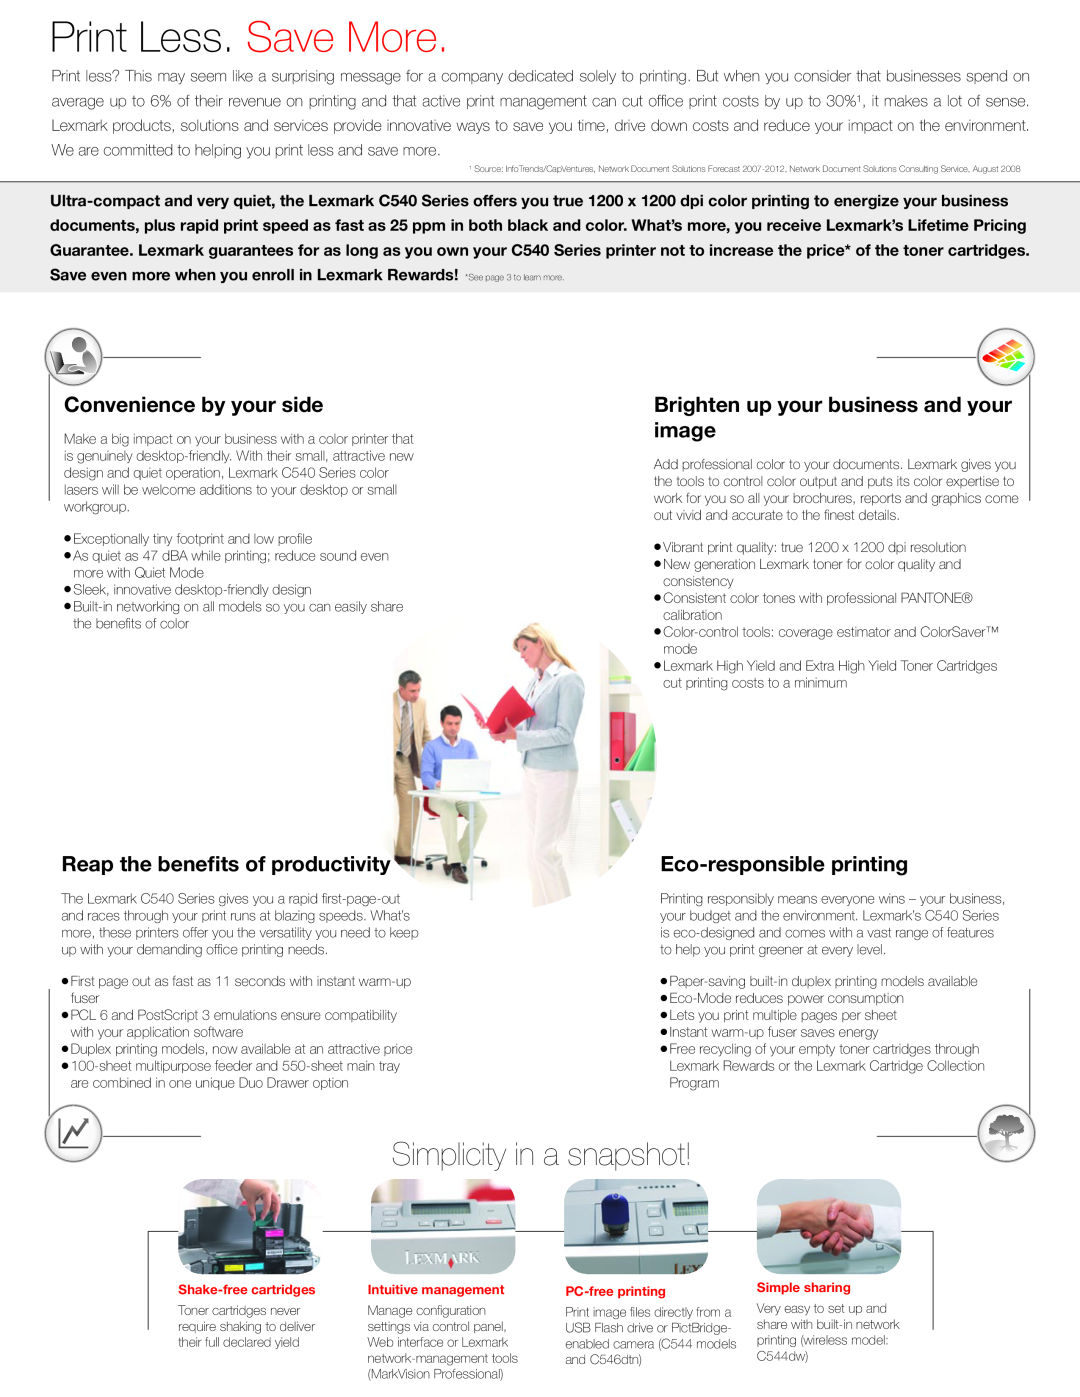 Lexmark C540N Simplicity in a snapshot, Convenience by your side, Reap the benefits of productivity, Print Less. Save More 